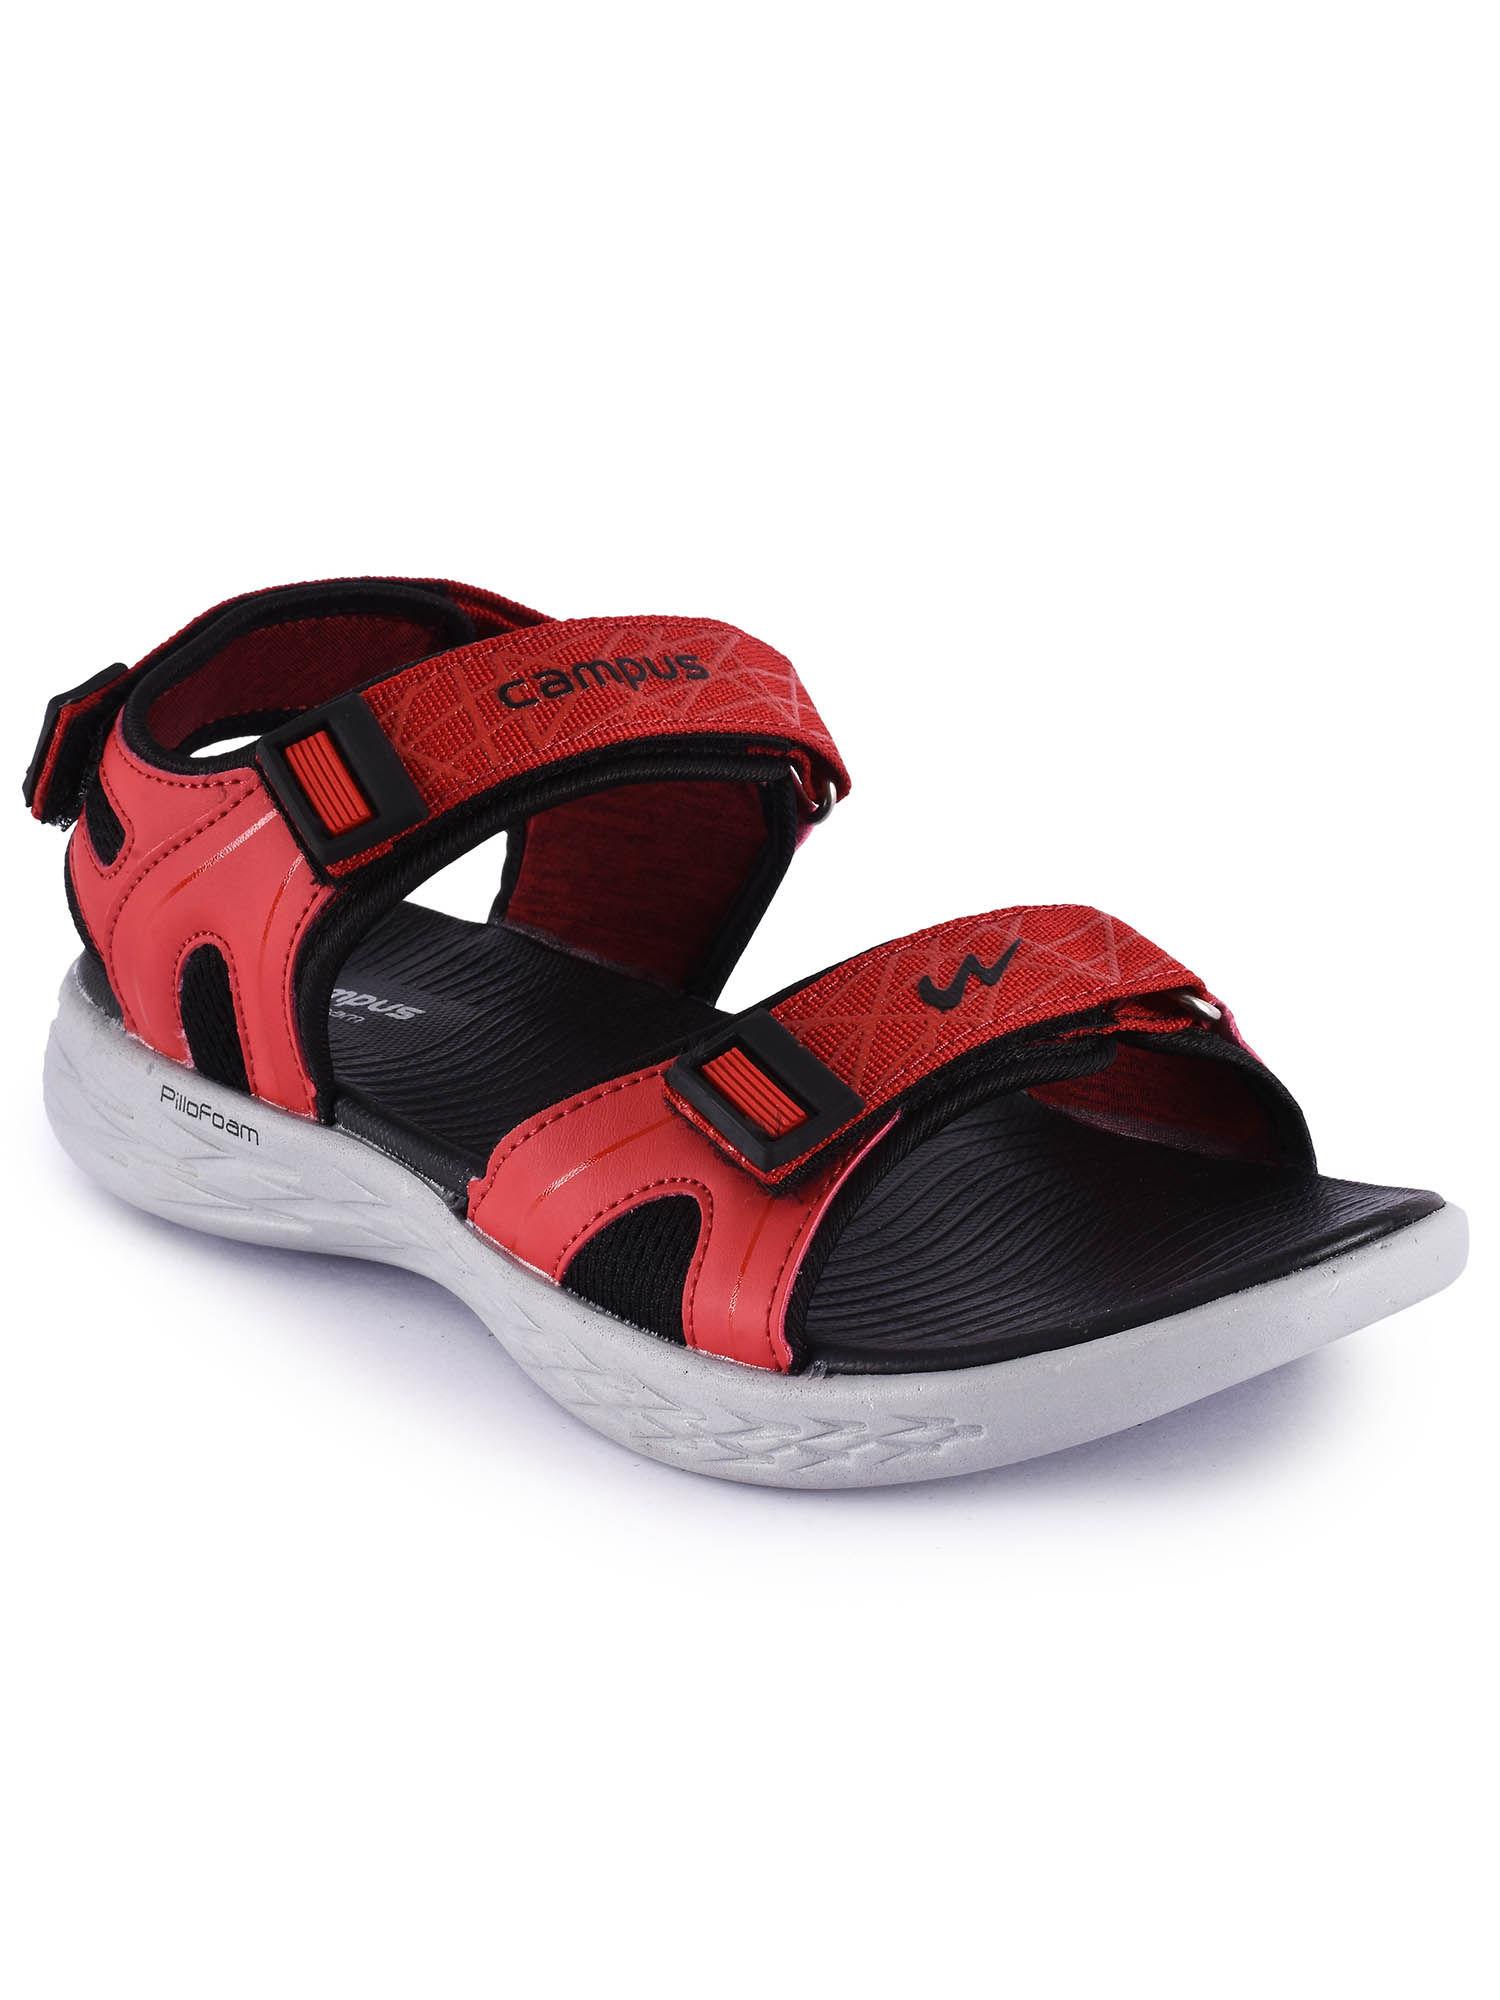 Sd-Pf018 Red Sandals For Men